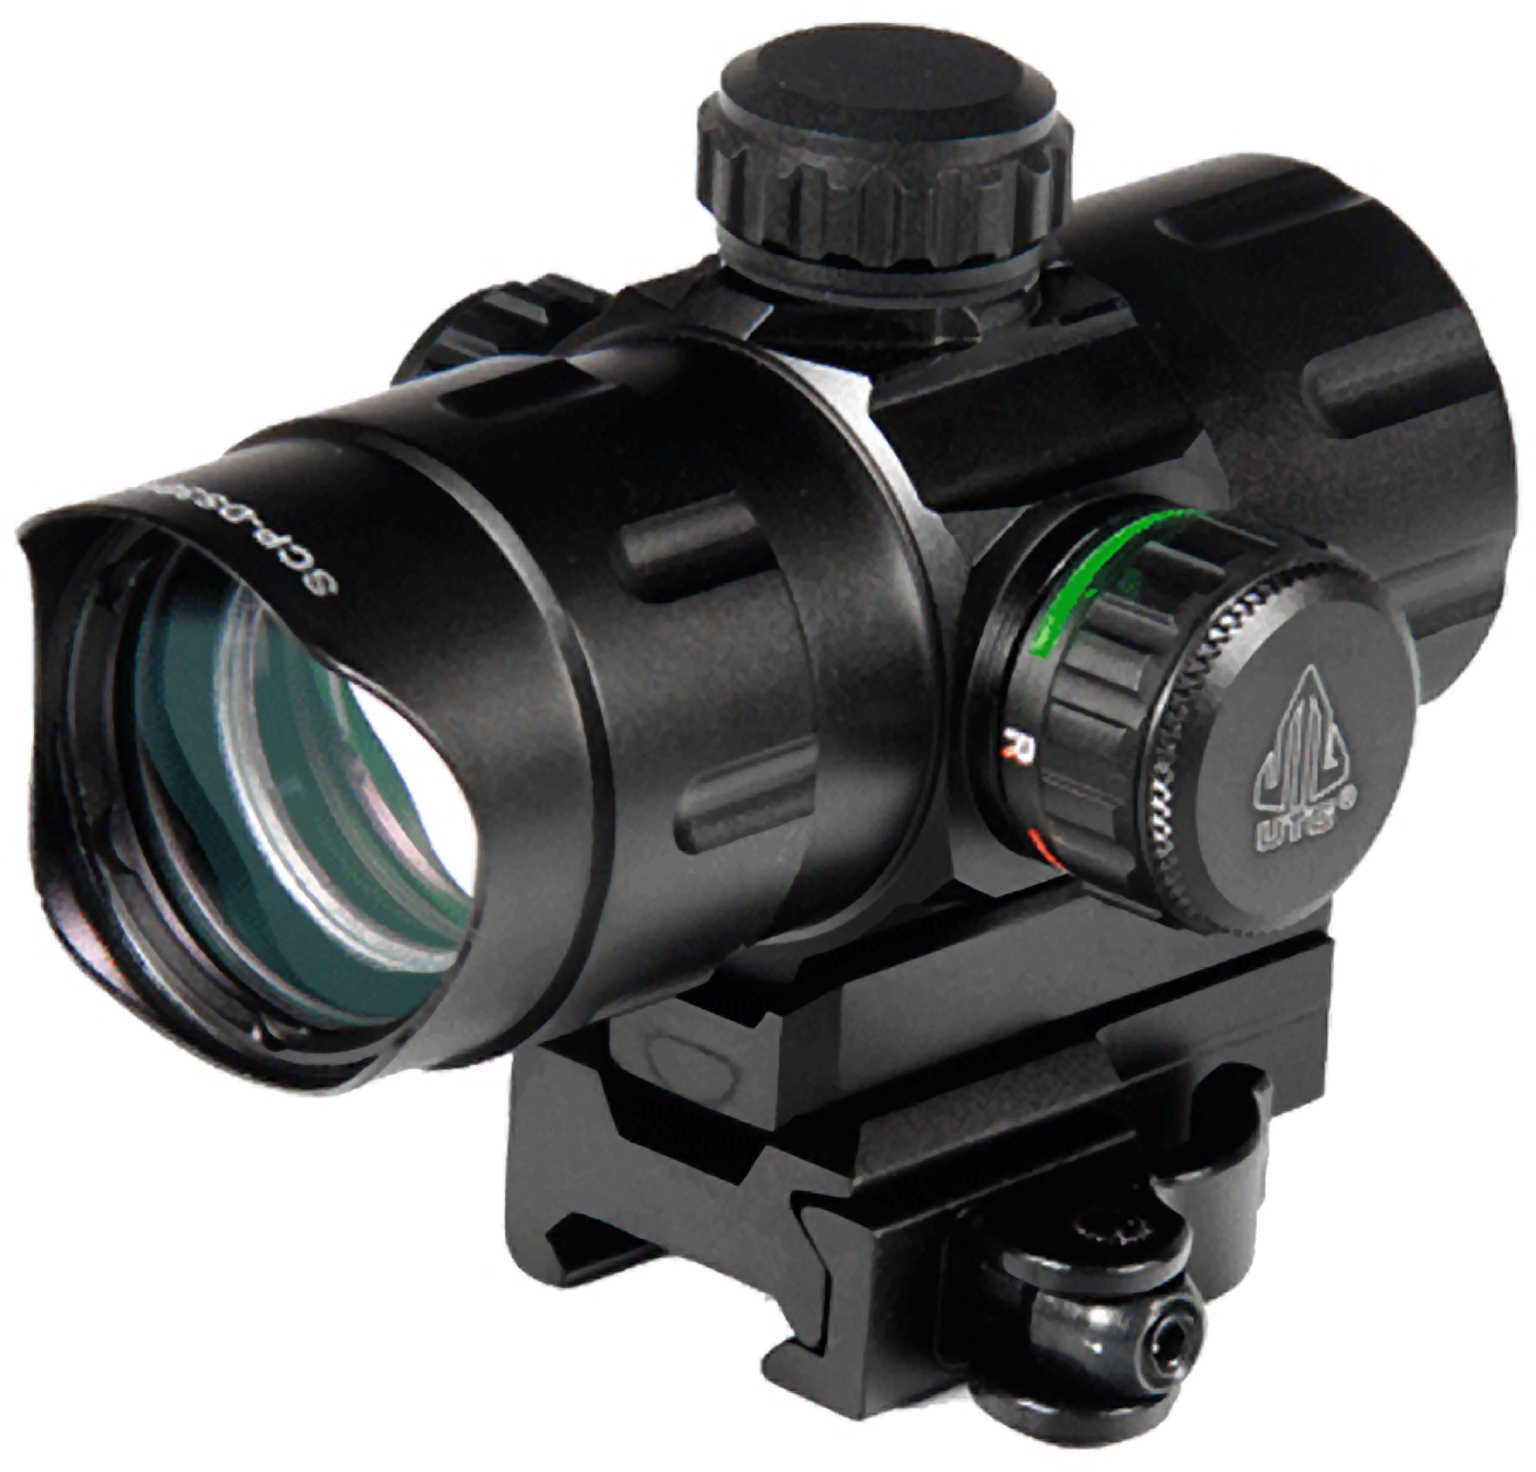 Leapers Inc. - UTG Instant Target Aiming Sight 4.2" Red/Green CQB Dot with Quick Disconnect Mount Black Finish SCP-DS384